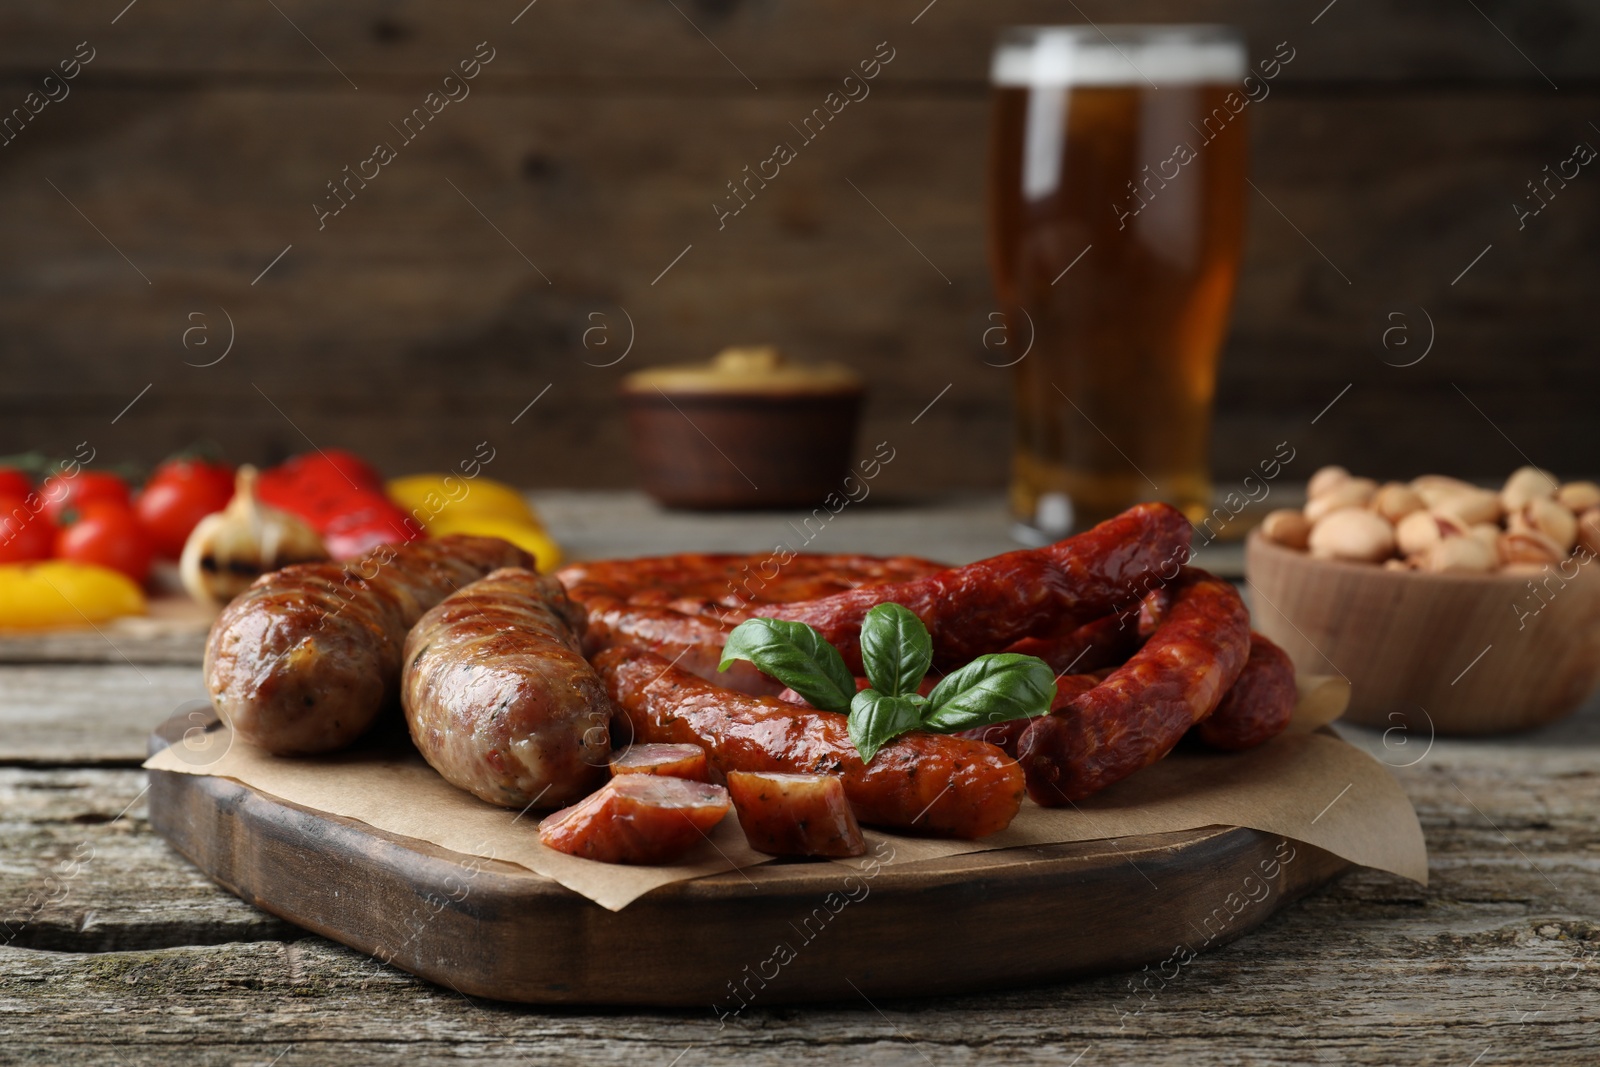 Photo of Set of different tasty snacks on wooden table, closeup view